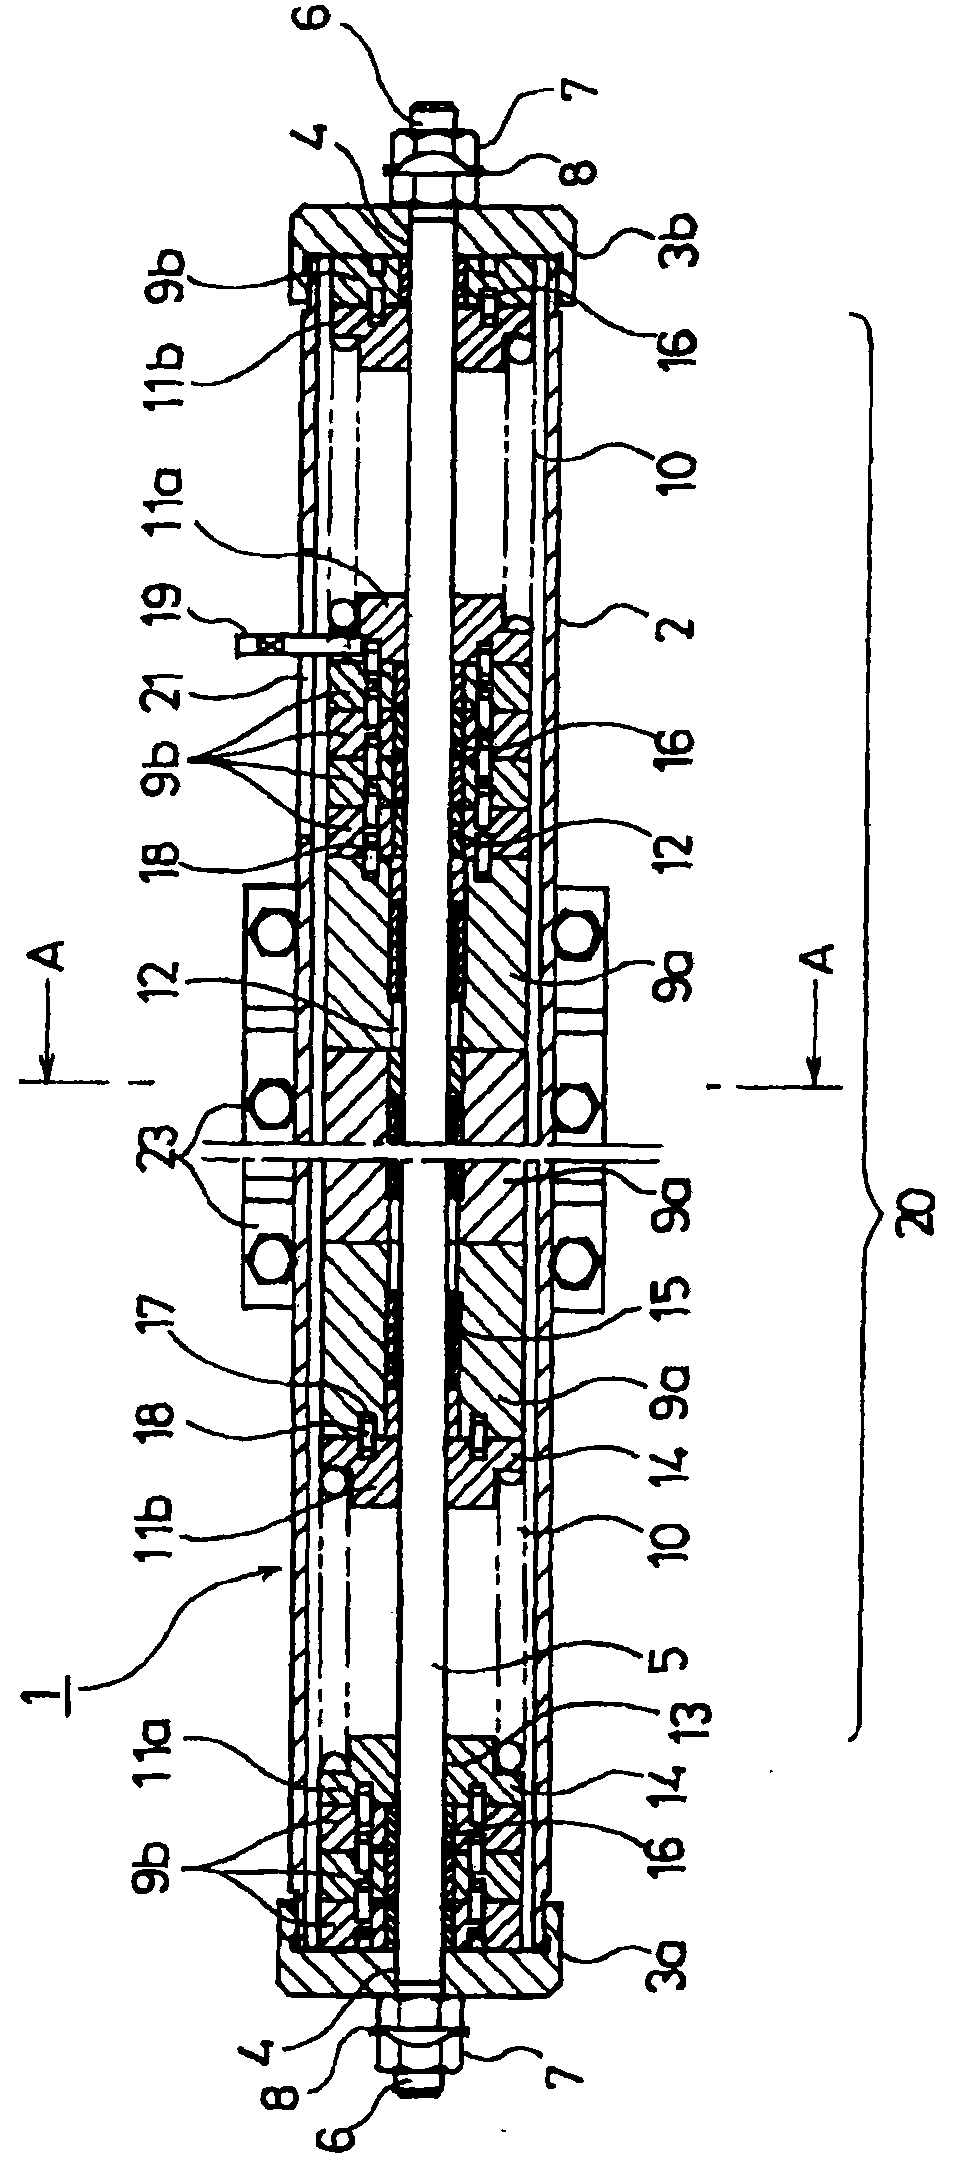 Dynamic damper and diesel engine where dynamic damper is mounted